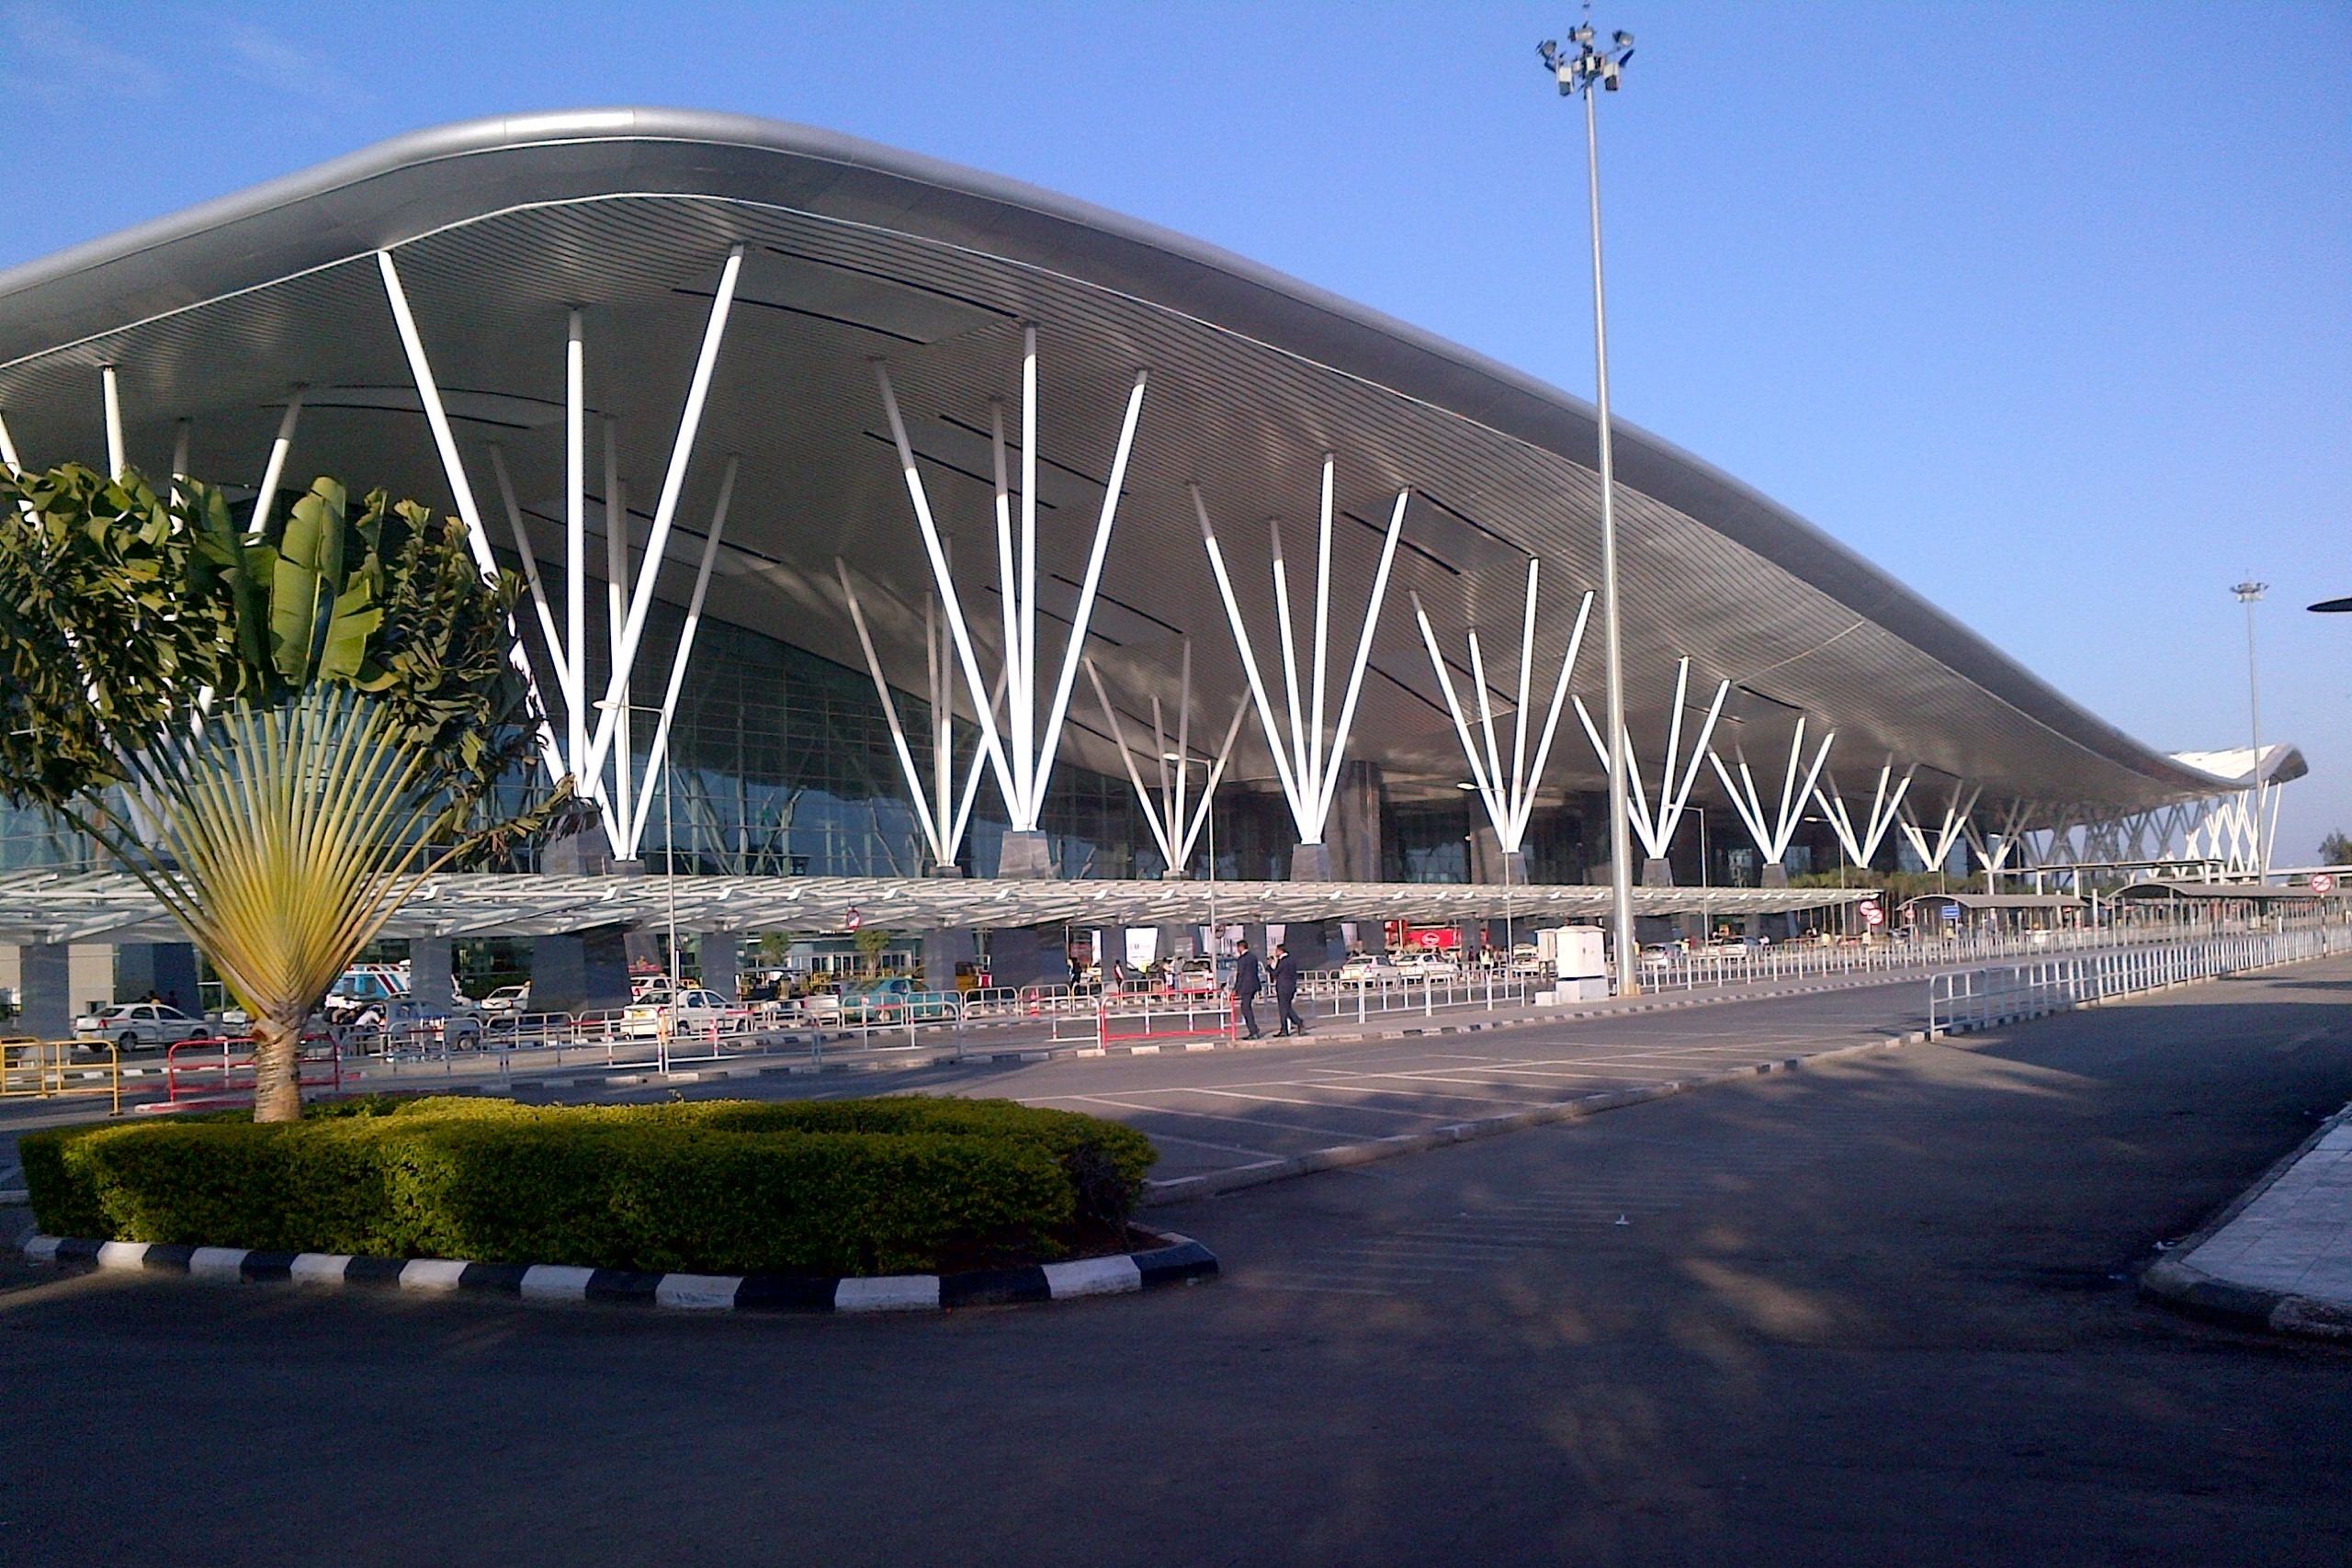 Bengaluru's Kempegowda International Airport was voted as the ‘Best Regional Airport in India & South Asia’ by Skytrax